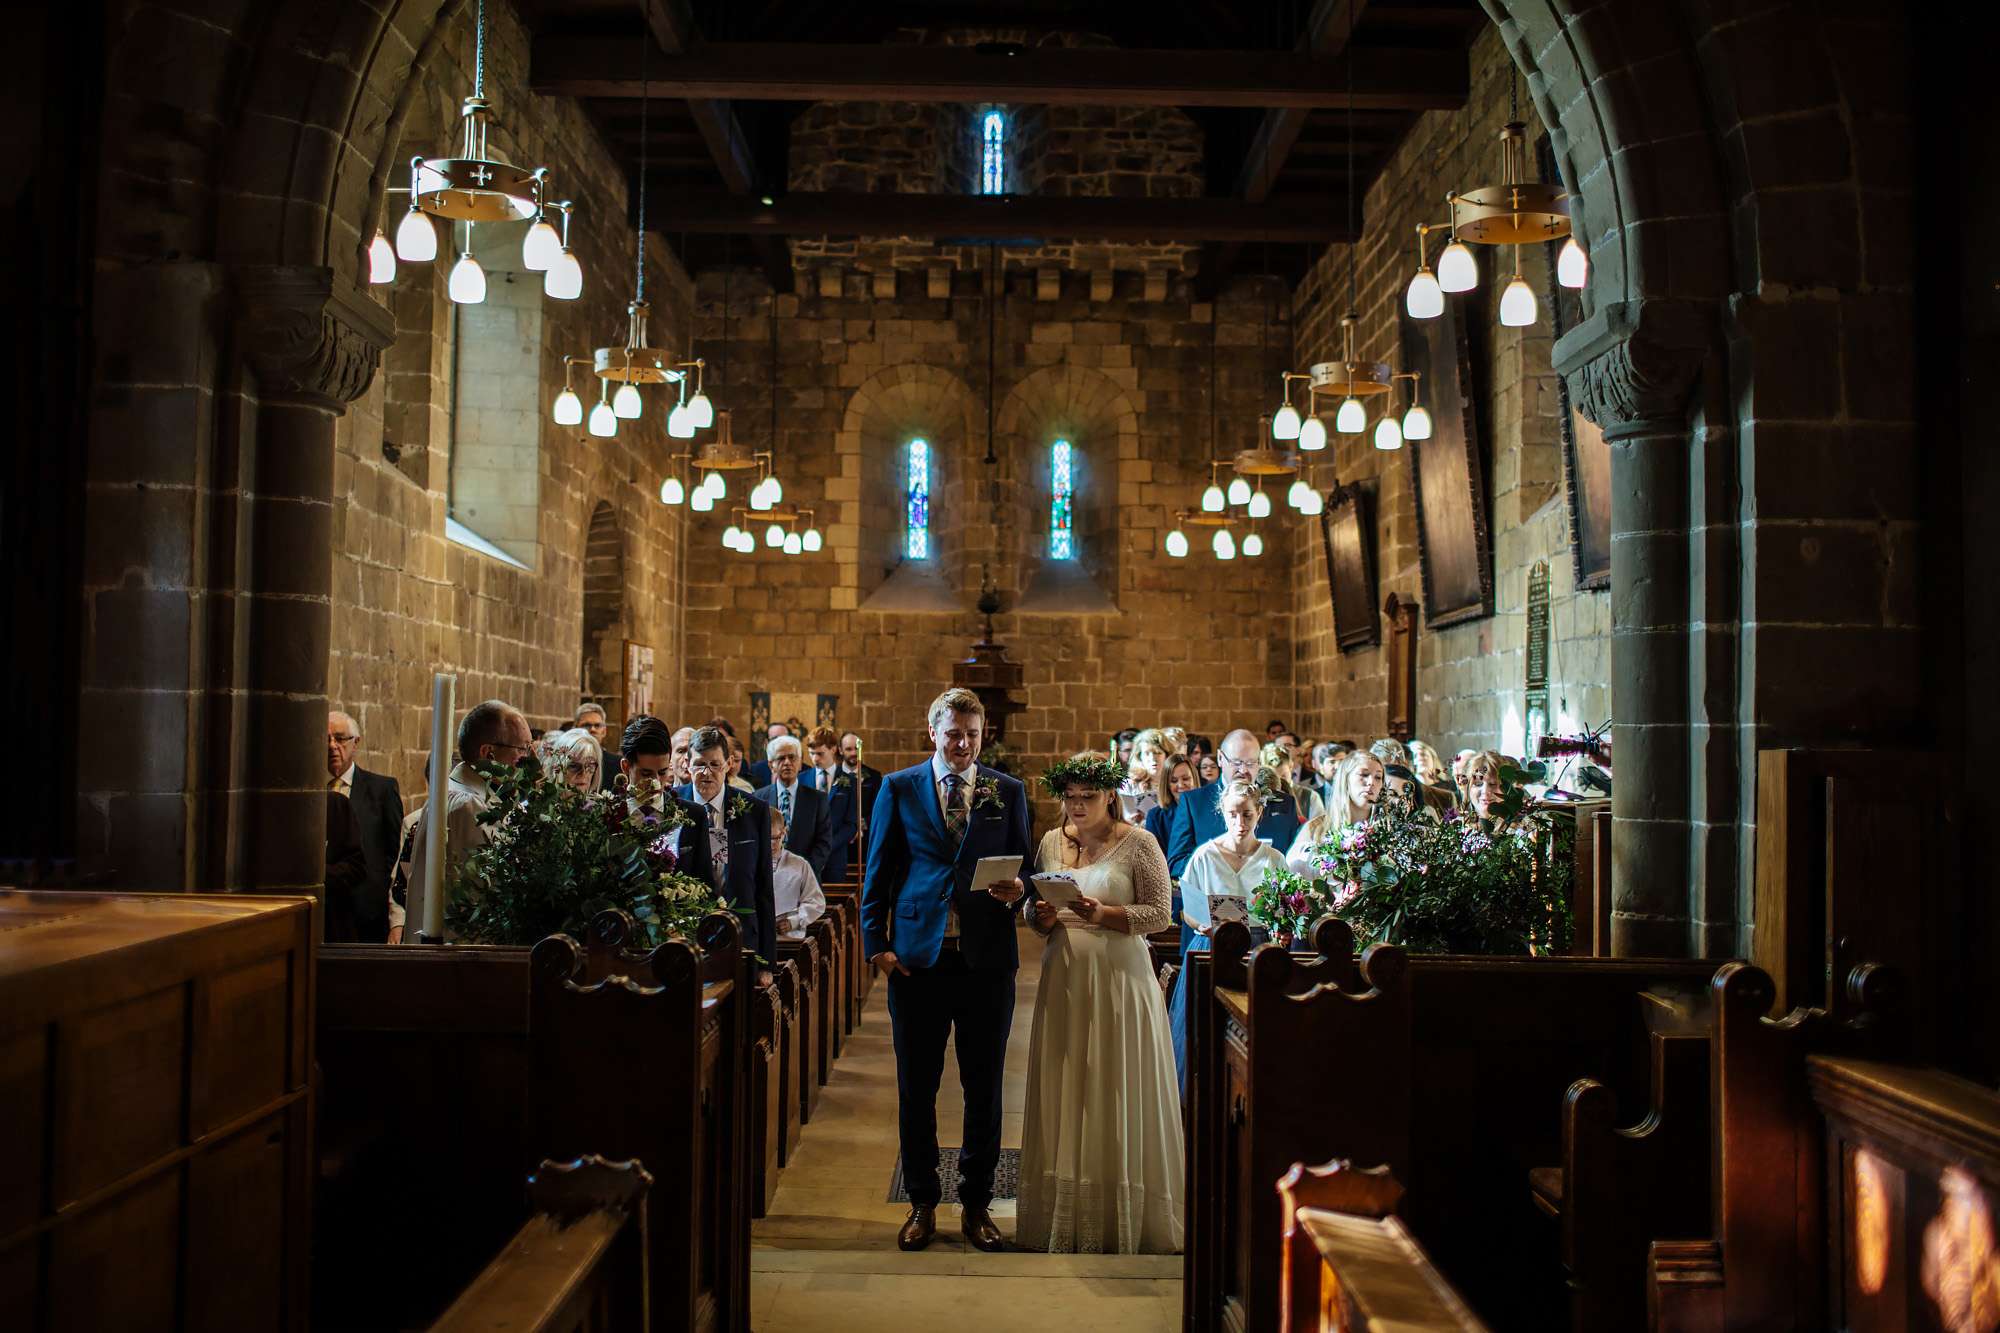 Bride and groom singing hymns in church at their wedding